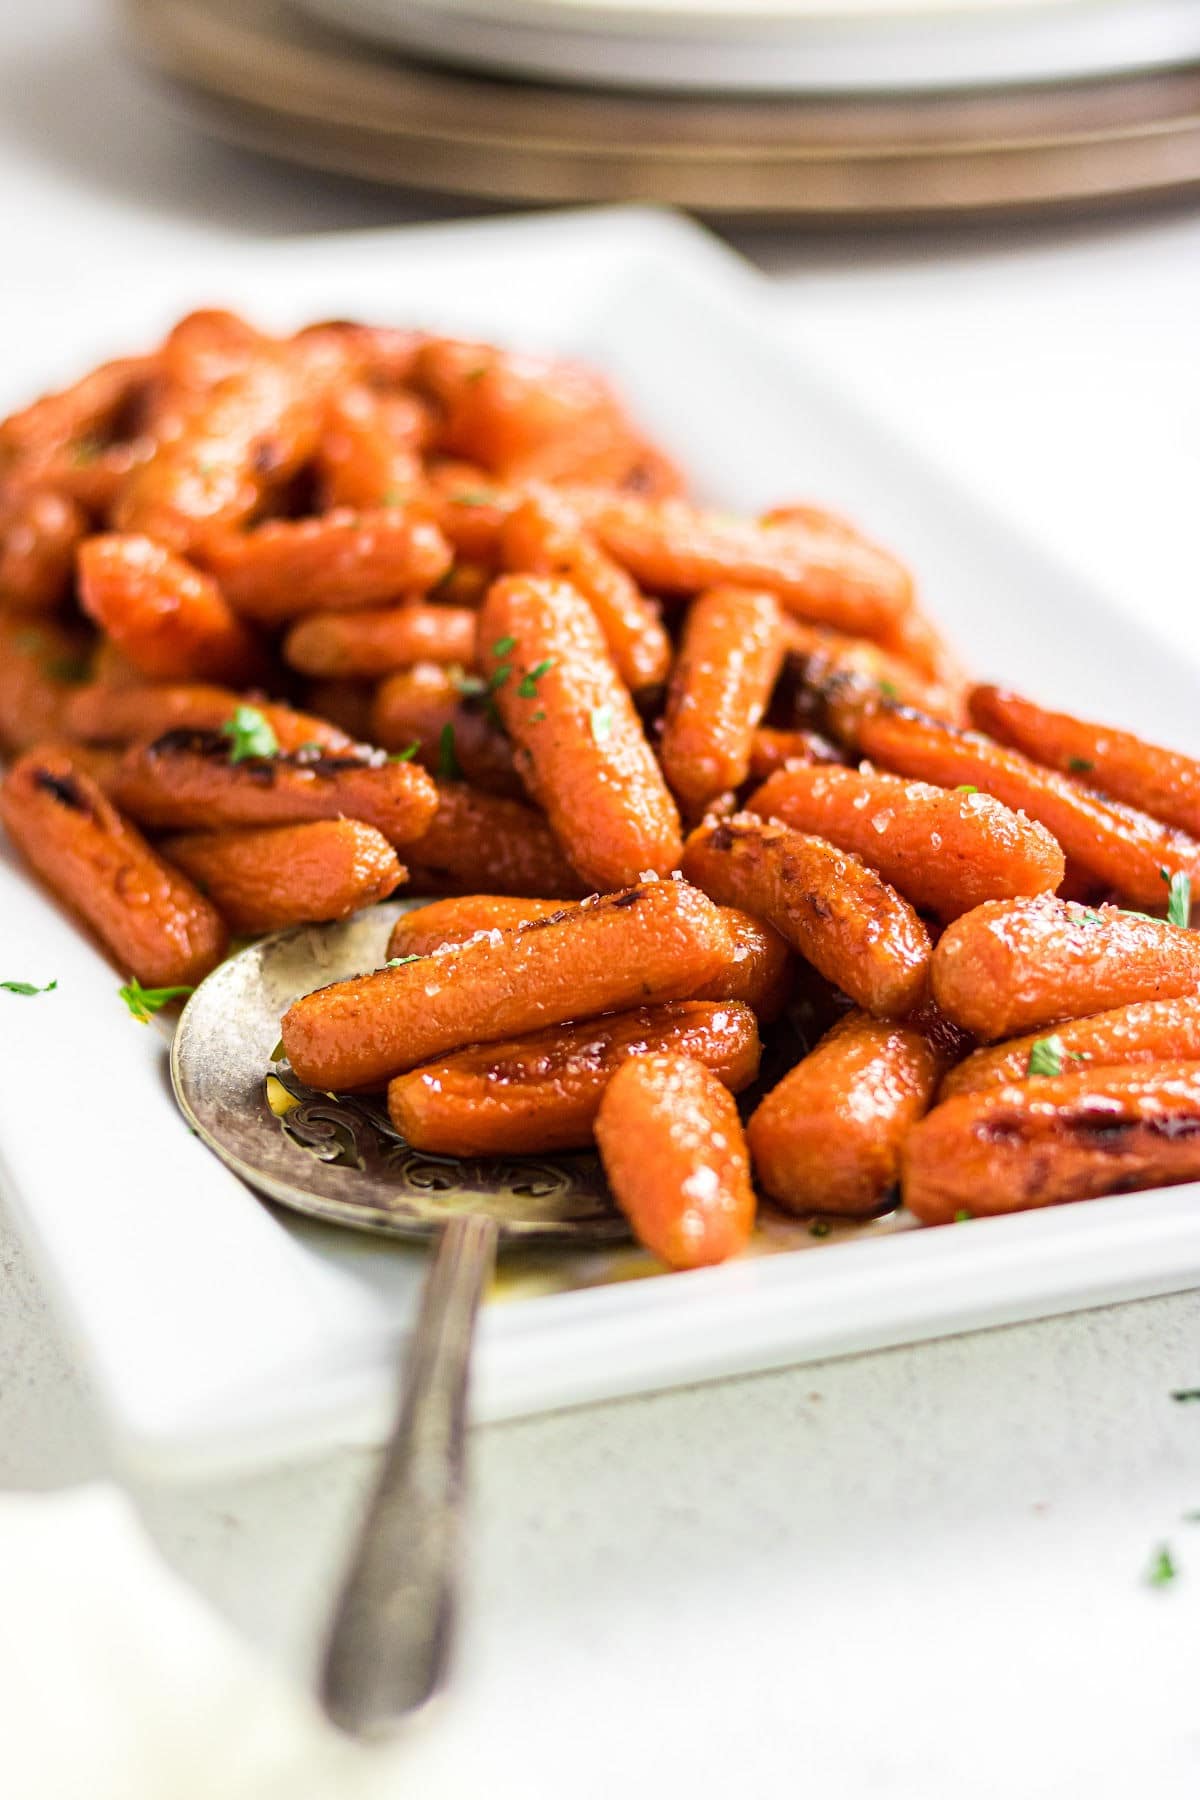 A serving platter stacked with baby carrots that have been glazed and roasted.